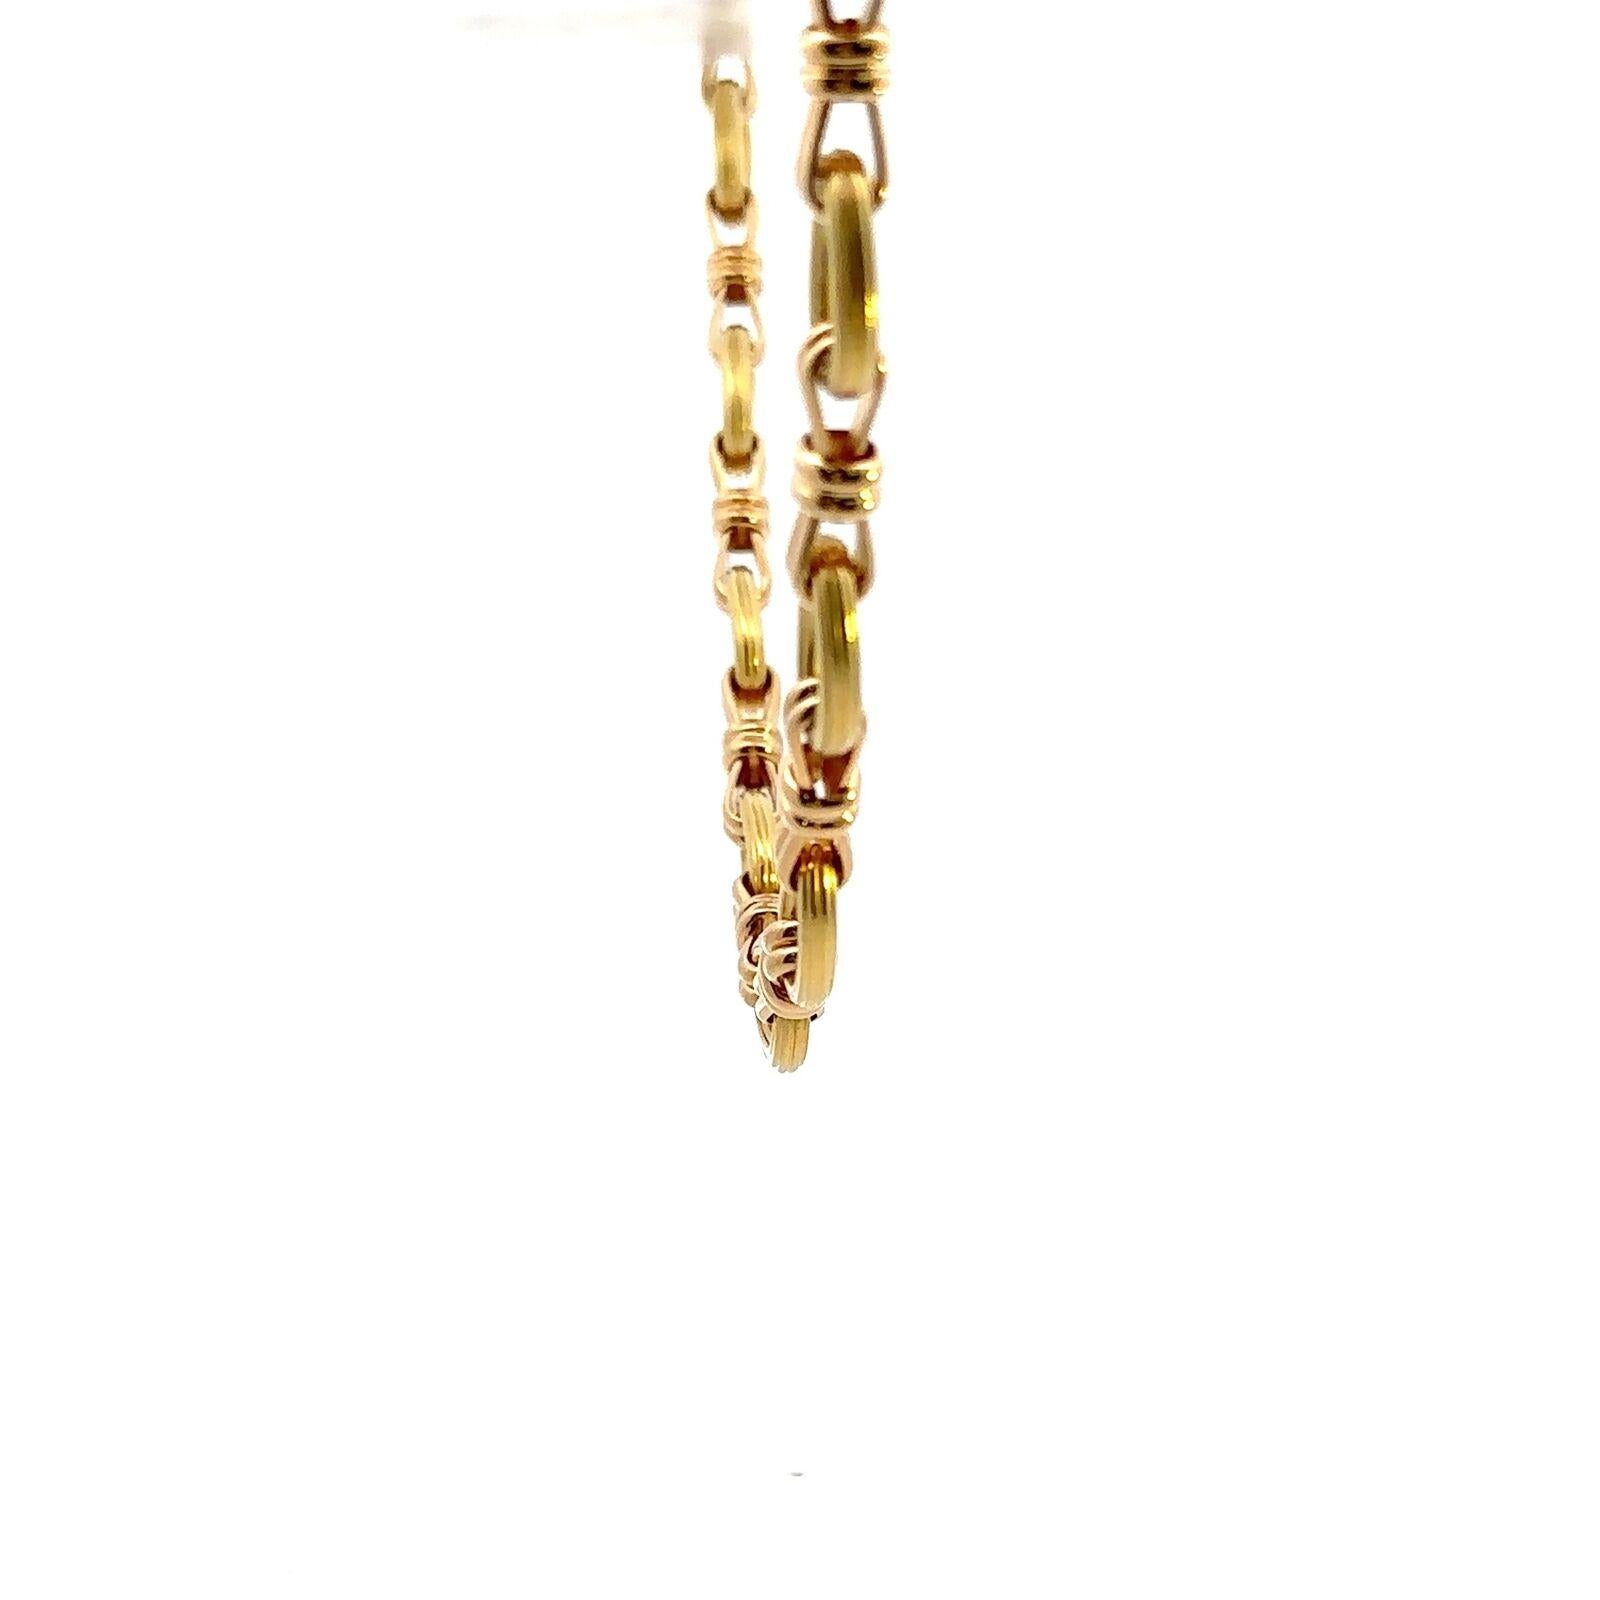 Chaumet Paris 18k Yellow Gold Link Necklace Vintage Circa 1970s

Here is your chance to purchase a beautiful and highly collectible designer necklace.  

The necklace is circles and links, iconic look from the 1970s.  The weight is 73.6 grams and